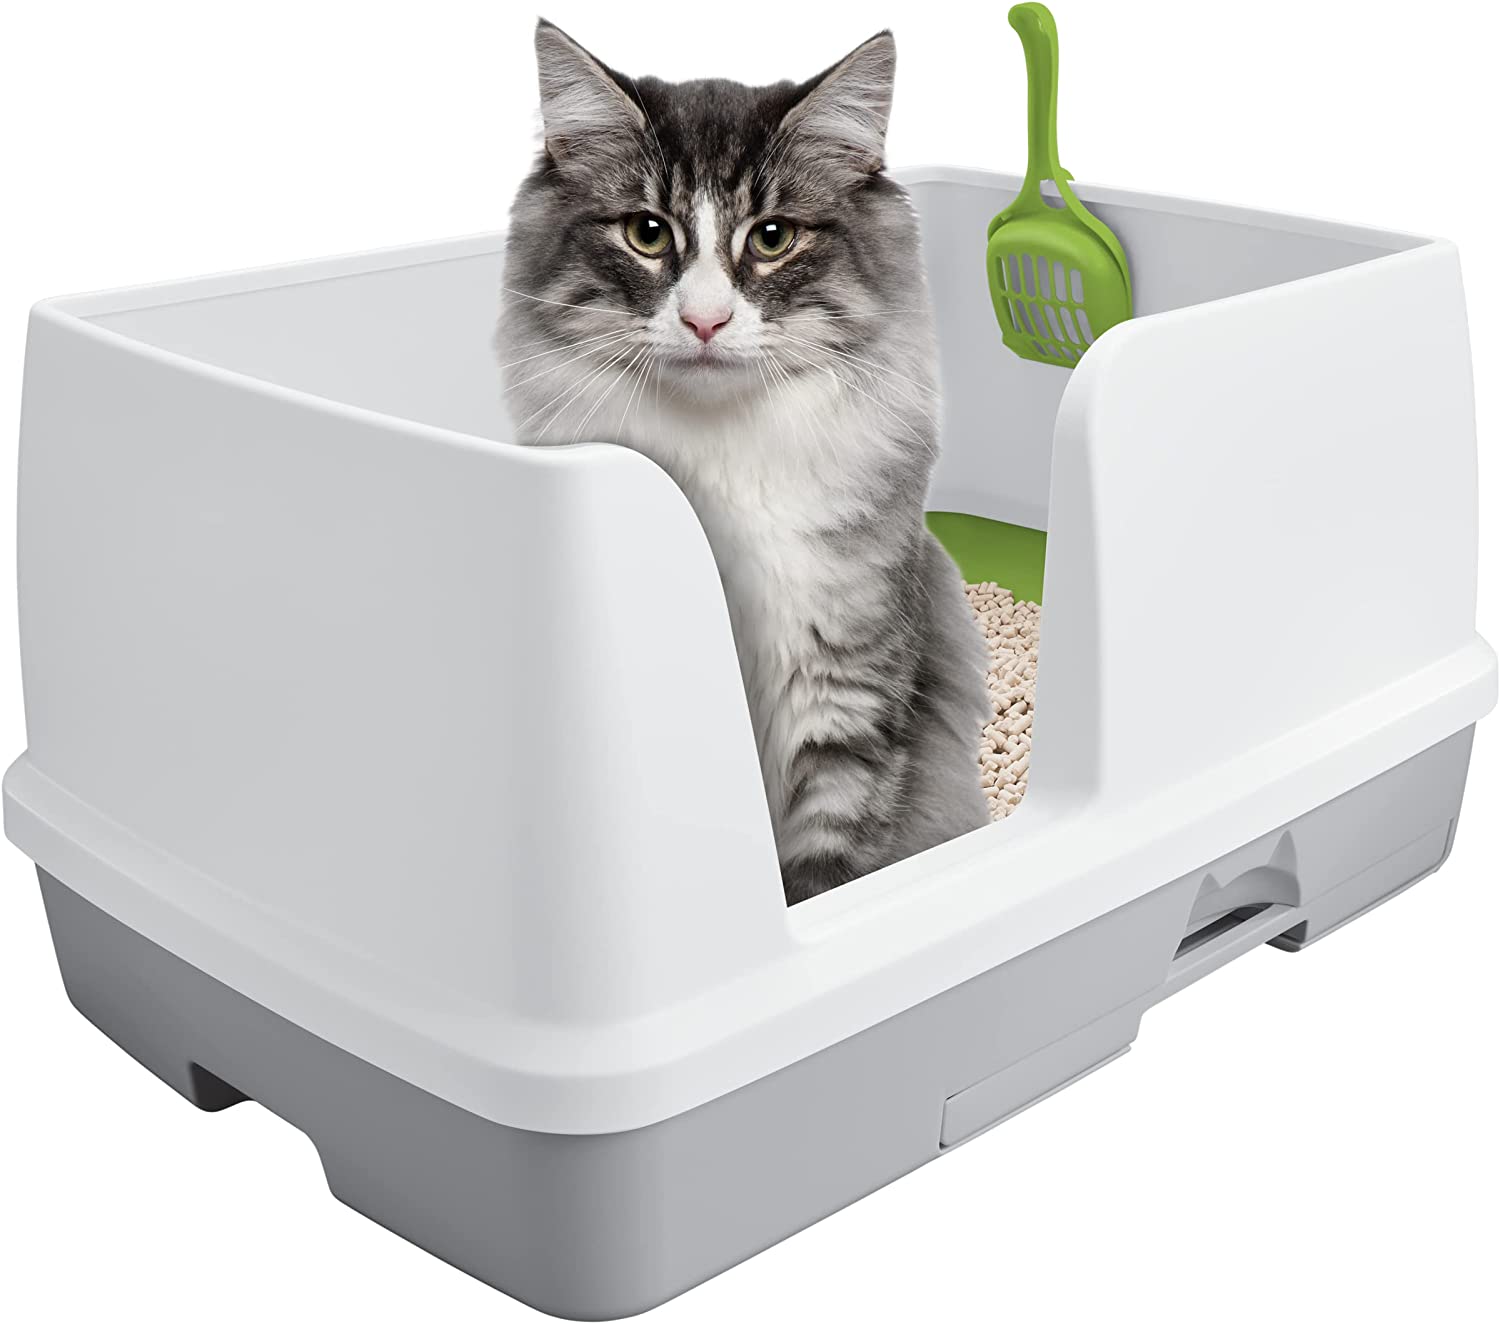 ScoopFree Covered Self-Cleaning Litter Box Second Generation